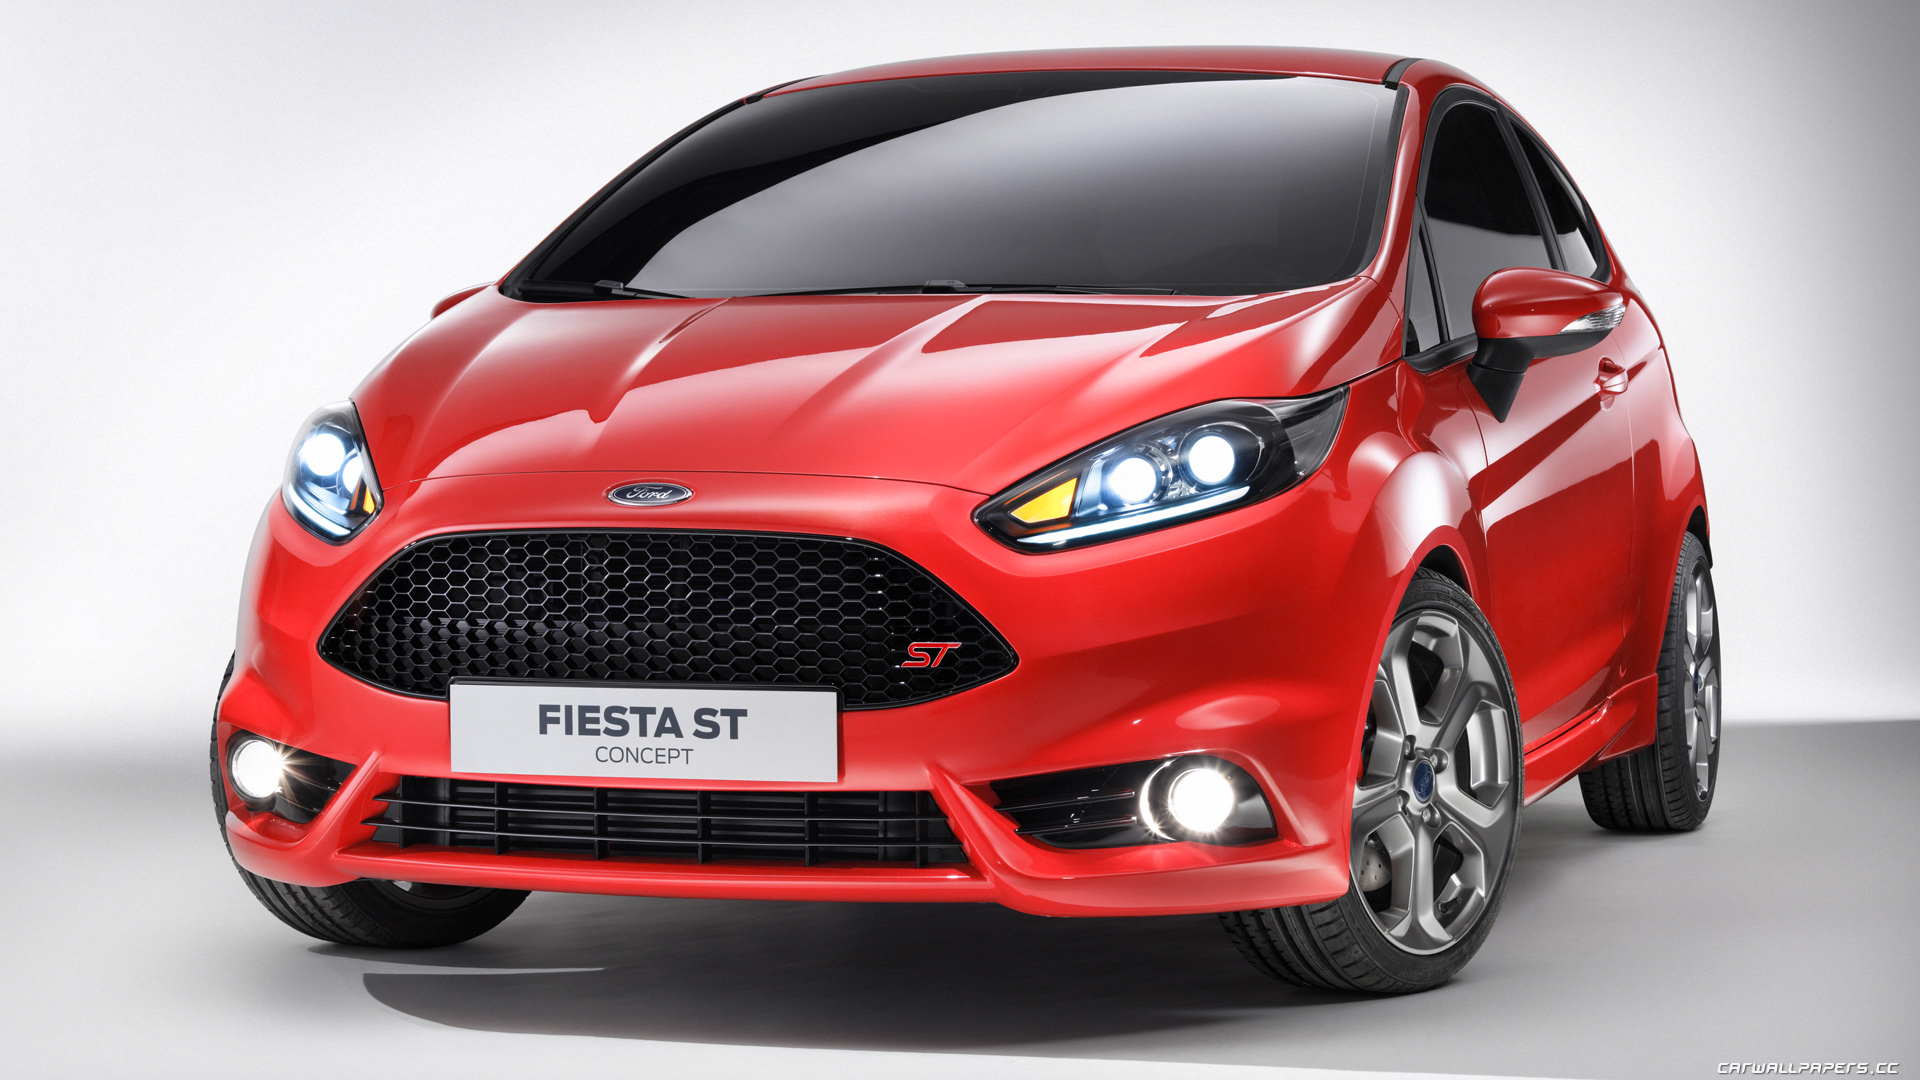 Vehicles 2011 Ford Fiesta St Concept HD Wallpaper | Background Image